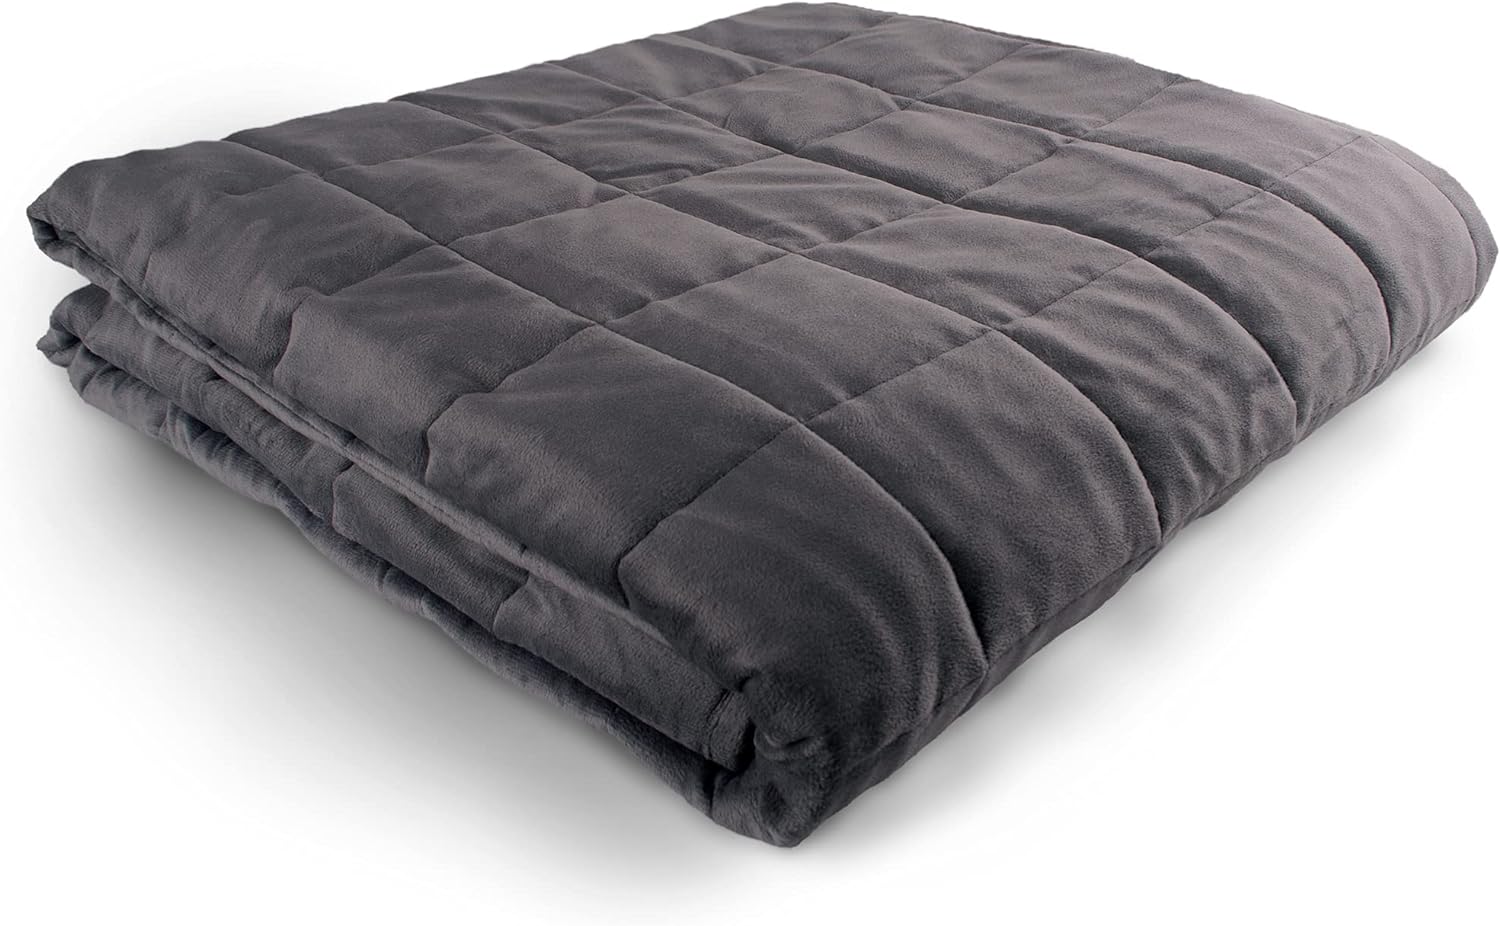 Weighted Blanket - 60 X 80 - 20-lbs - No Cover Required - Fits Queen/King Size Bed - for 130-180-lb Adult - Silky Minky Grey - Premium Glass Beads - Calming Stimulation Sensory Relaxation